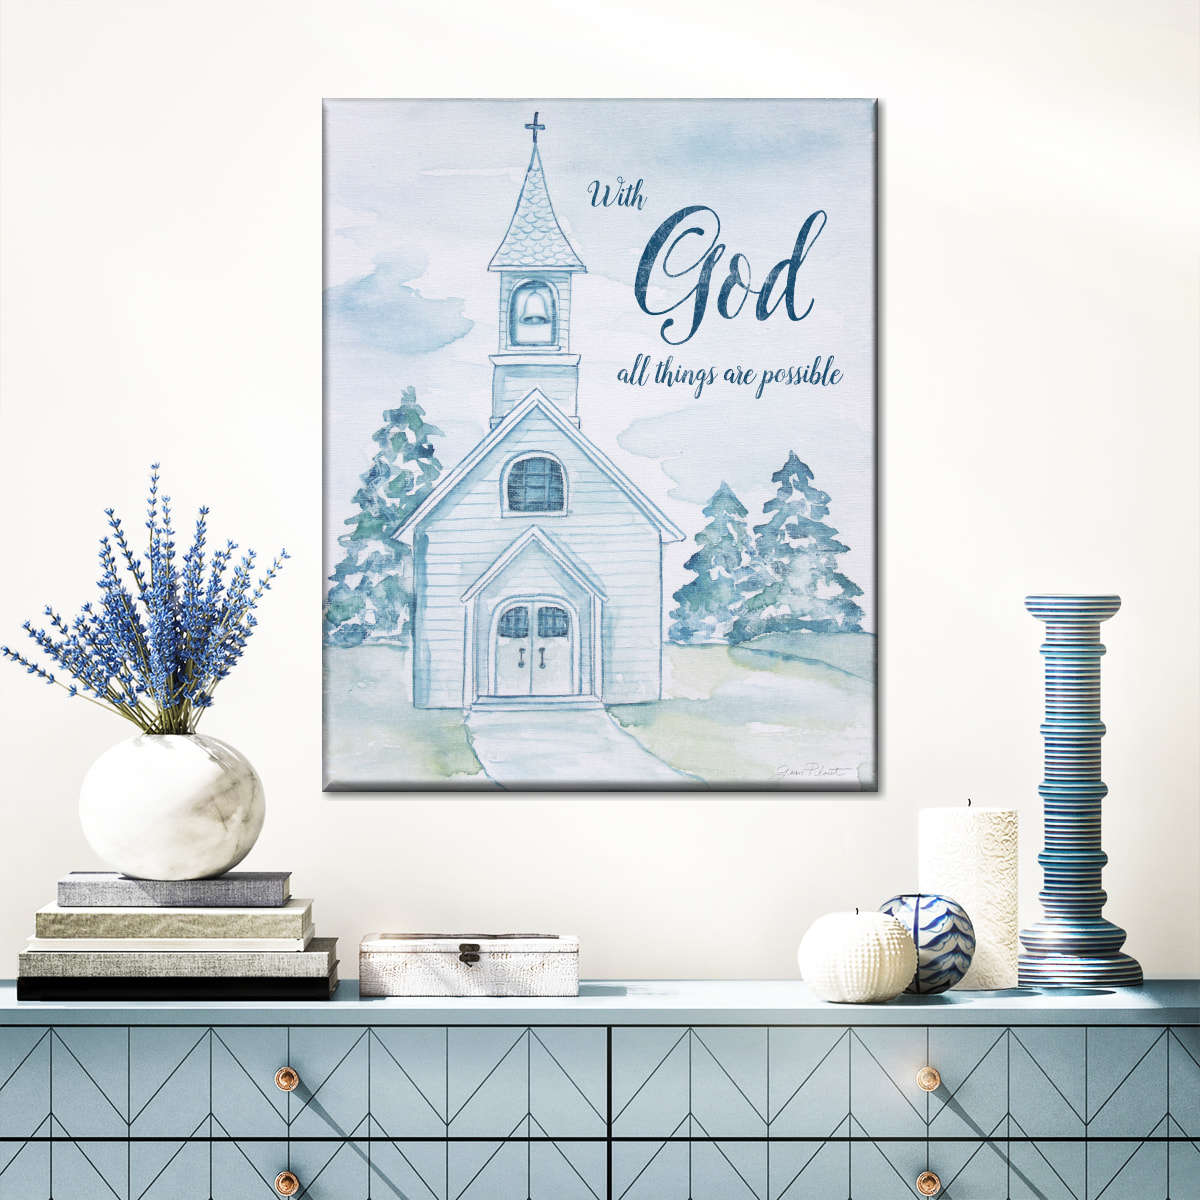 Church With God All Things Are Possible Canvas Wall Art - Christian Wall Decor Art - Religious Wall Decor